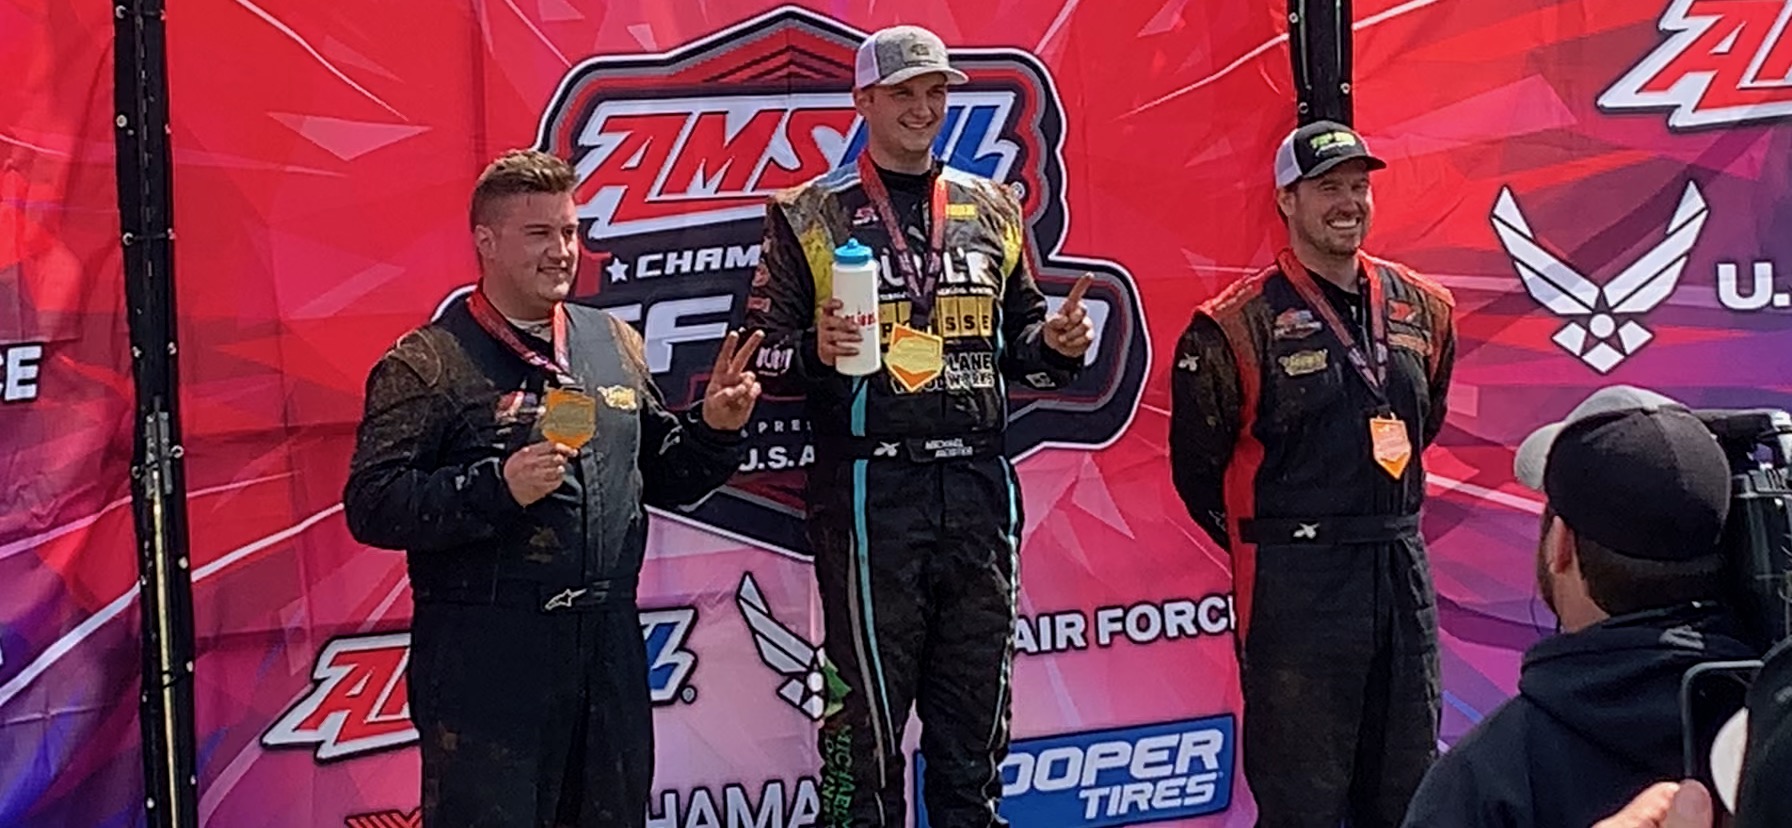 Michael Meister wins first place, and stands on the winners podium with 2nd and 3rd place finishers